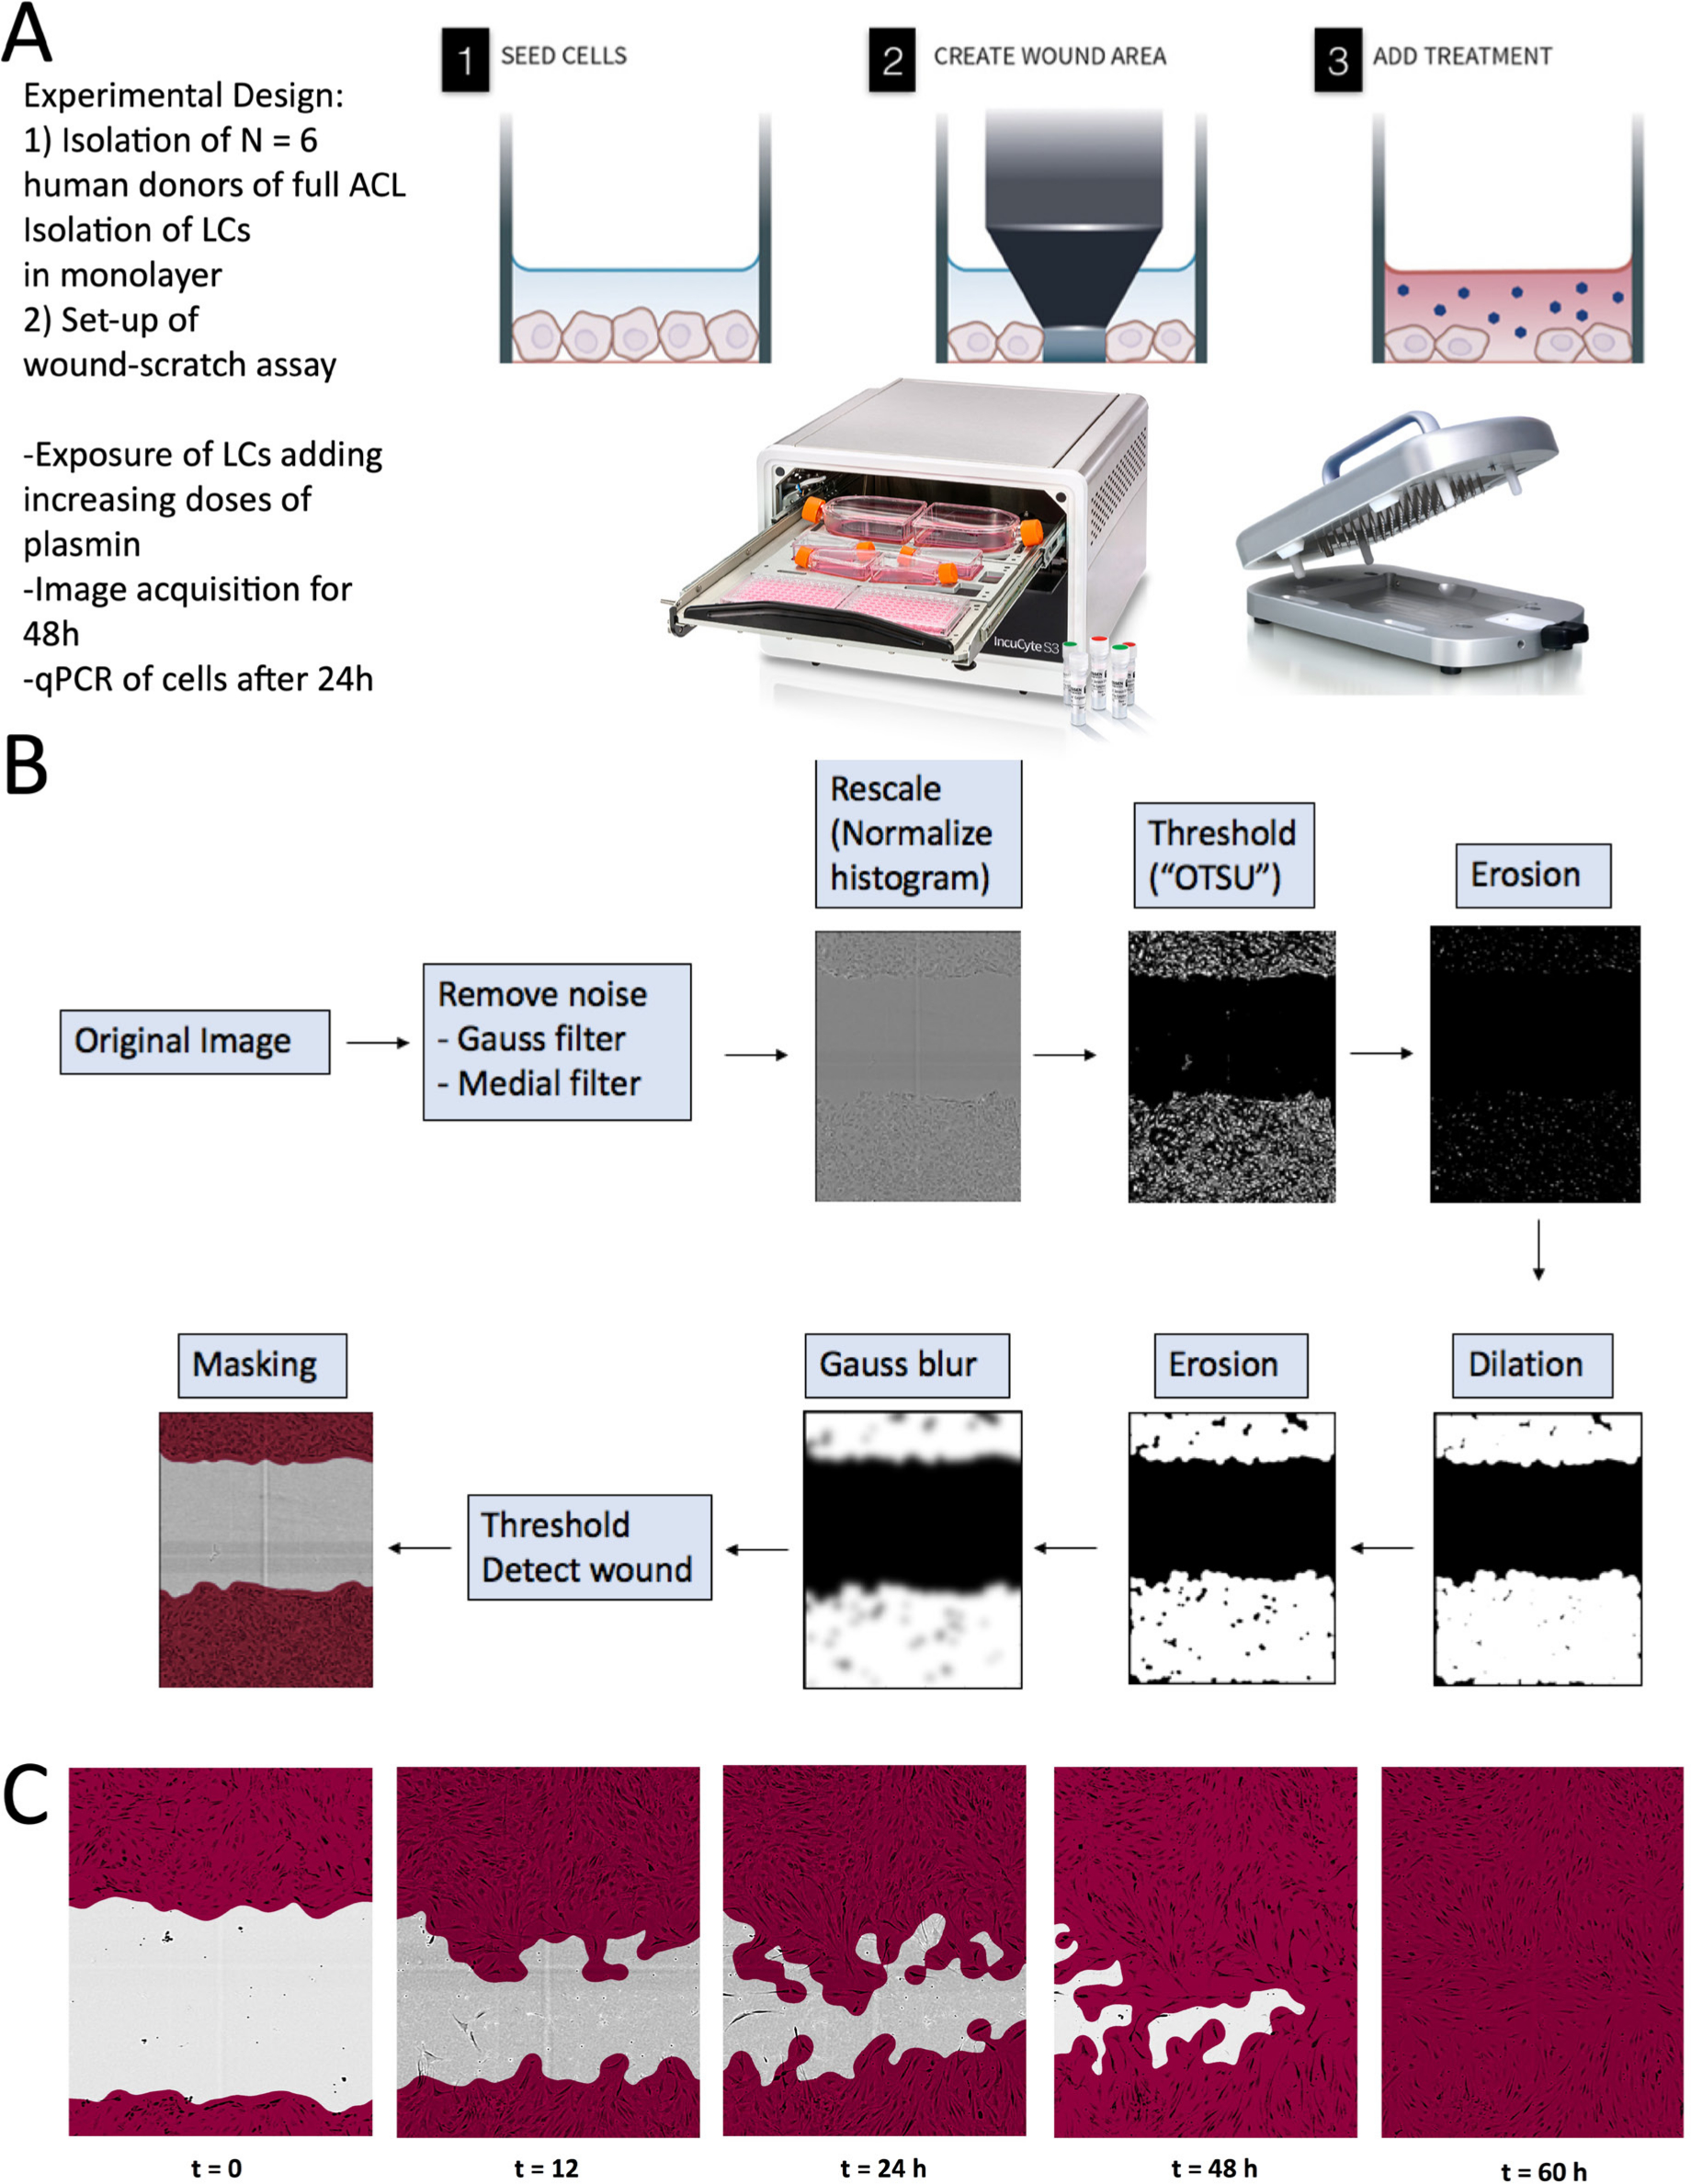 Fig. 2 
            Experiment design of the performed study to test the effect of plasmin, a component of the synovial fluid, on the wound healing behaviour of primary anterior cruciate ligament (ACL)-derived ligamentocytes (ACL-LCs). a) Experiment set-up. b) Customized main image processing chain using open source CellProﬁler software to segment the ACL-LCs and wound closure in the wound scratch assays. "OTSU" refers to the image thresholding algorithm named after Nobuyuki Otsu.16 c) Example of phase-contrast images taken at a 10× magnification with the IncuCyte S3 system demonstrating customized segmentation of ACL-LCs. LC, ligamentocyte; qPCR, quantitative PCR.
          